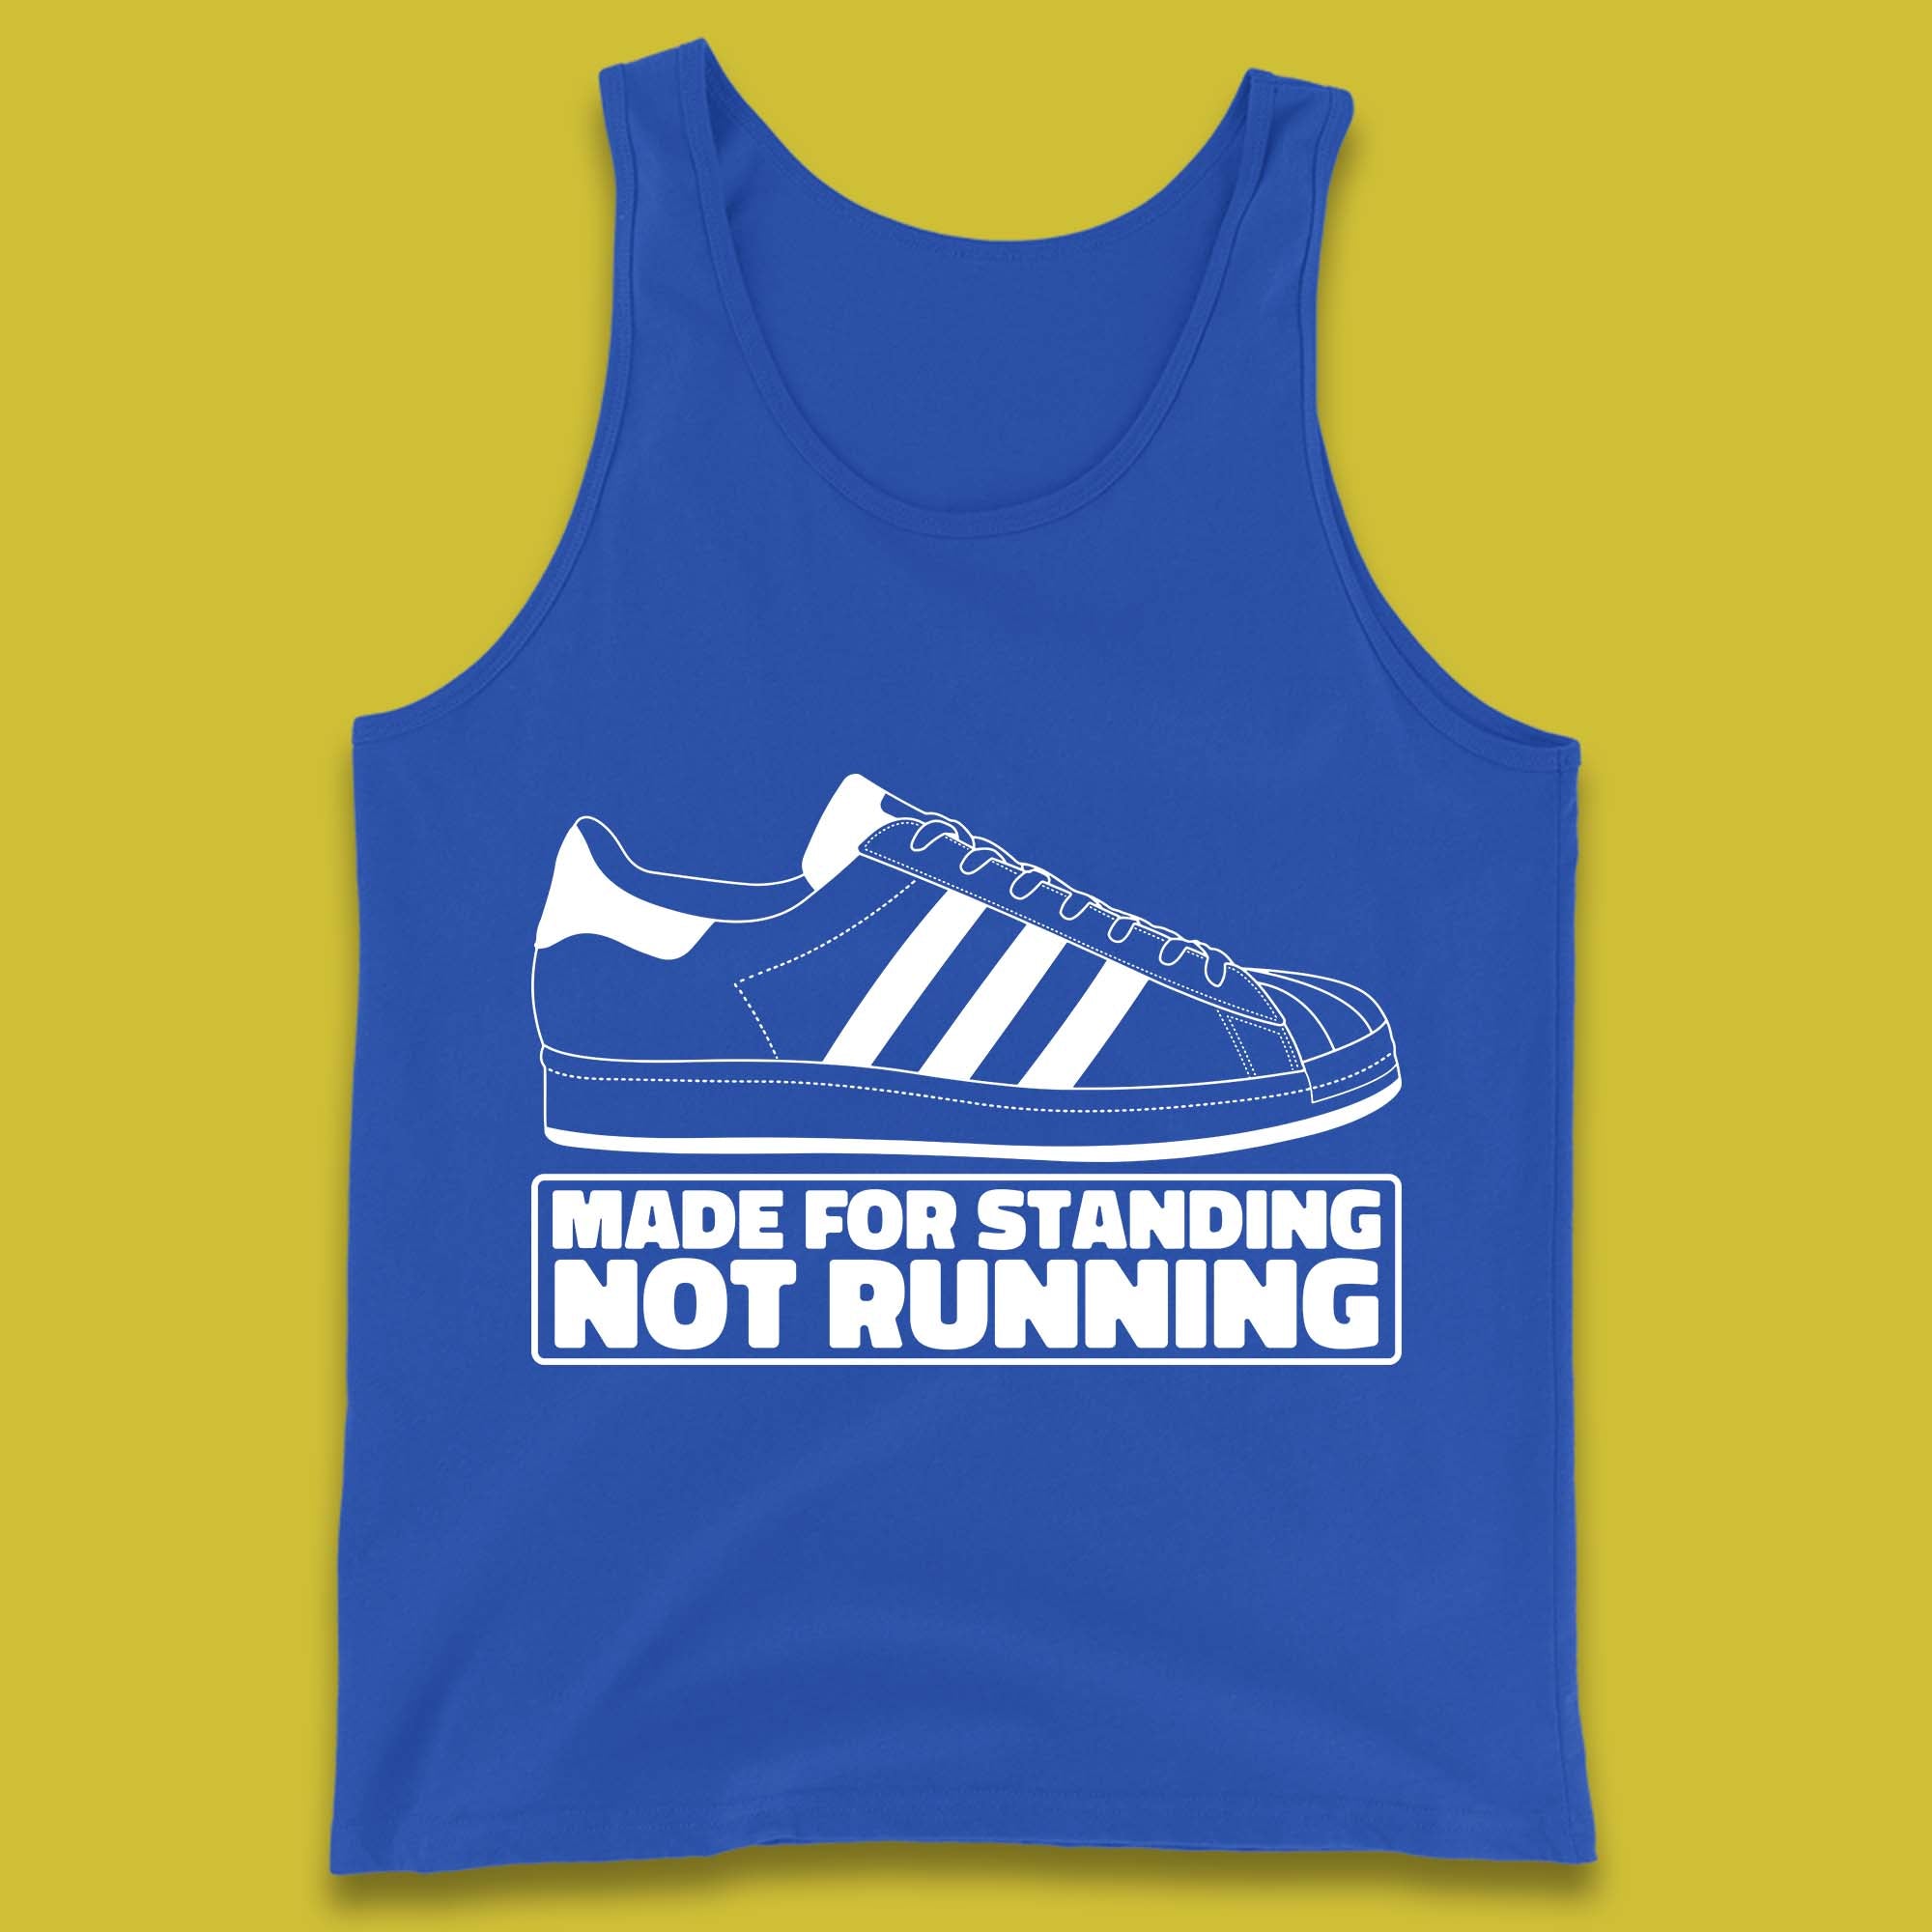 Made For Standing Not Running Football Hooligan Trimm Trab Terraces Tank Top